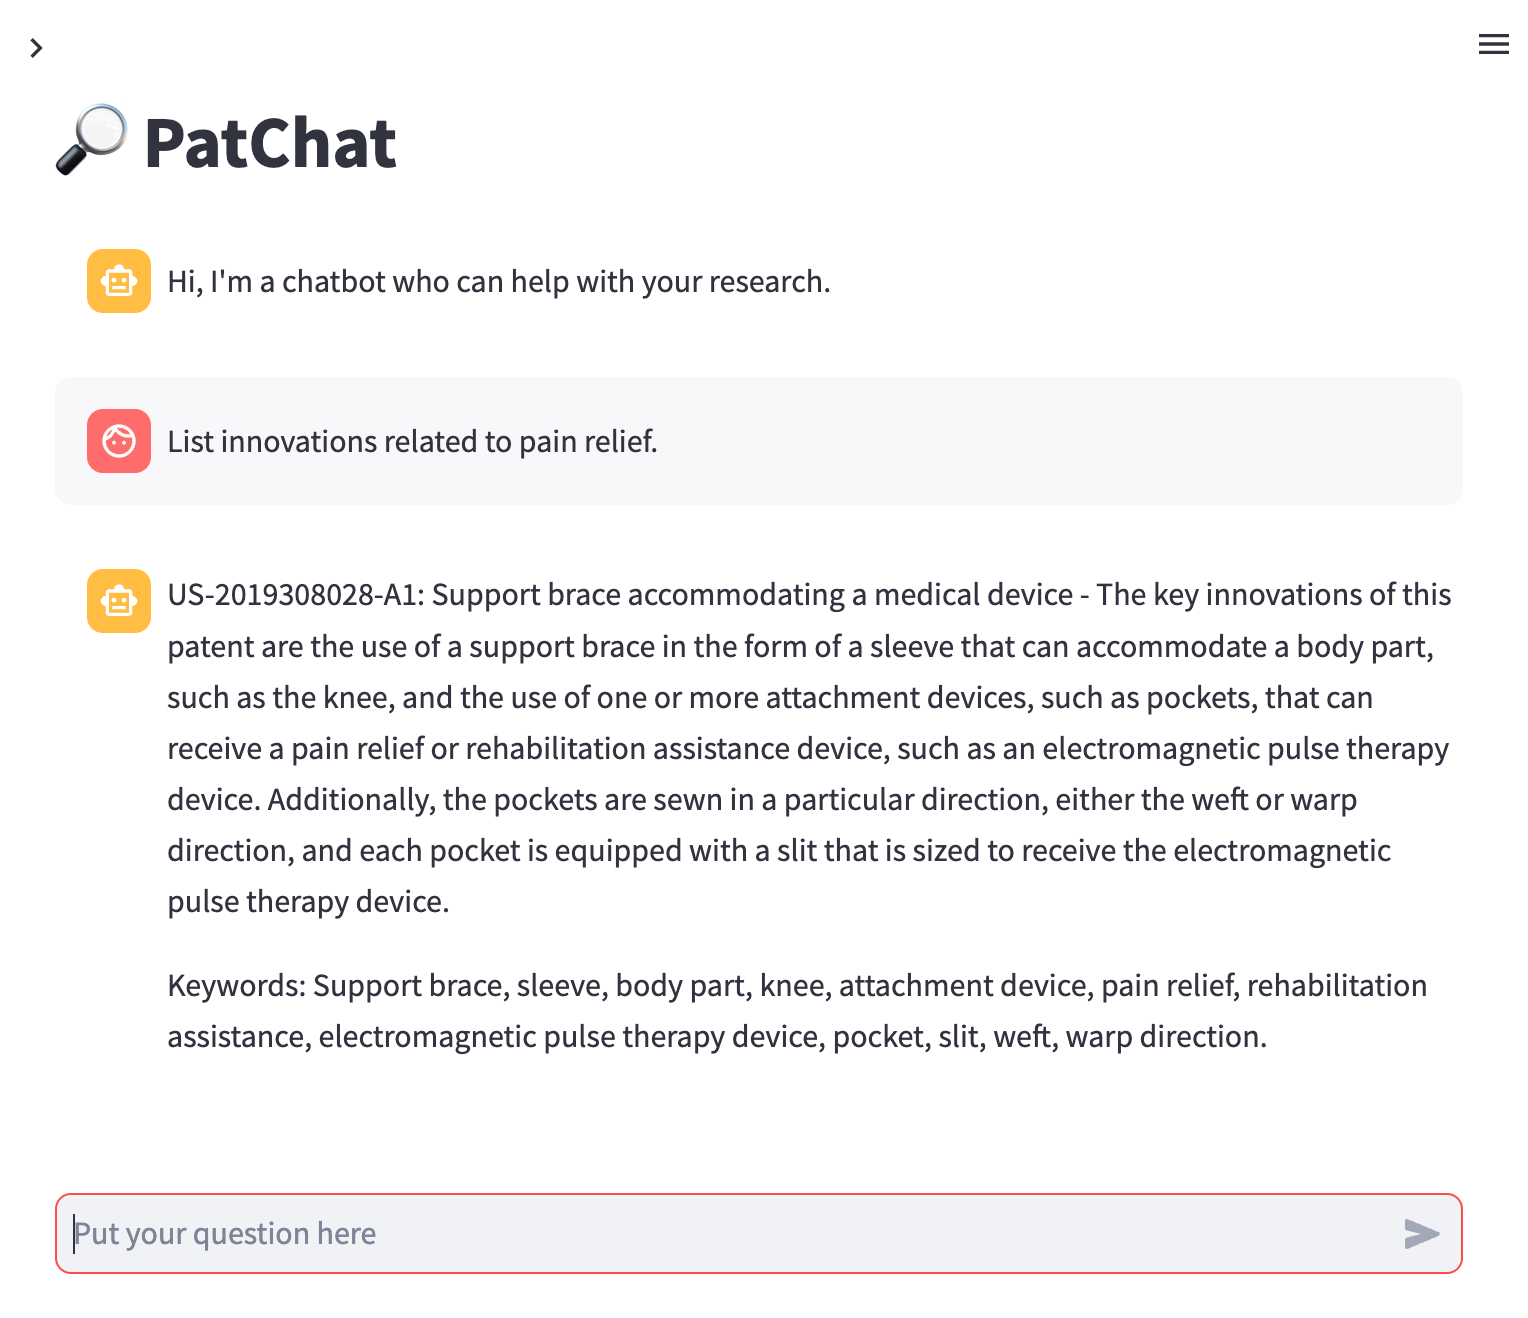 Example of PatChat app query results